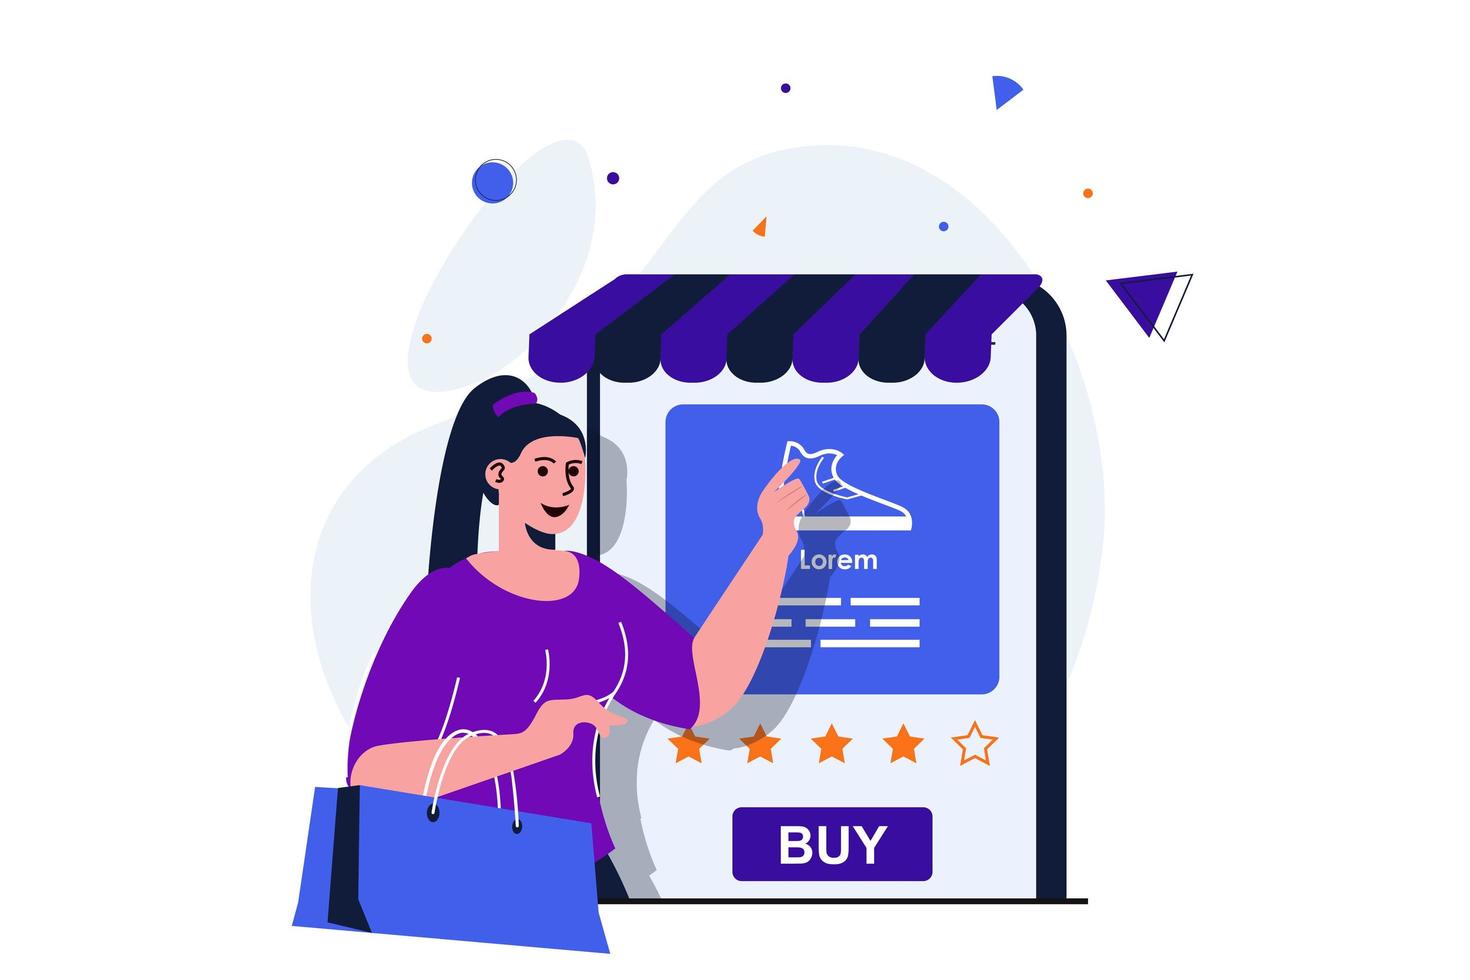 Mobile commerce modern flat concept for web banner design. Woman chooses shoes in online store, looking at rating and makes purchase in application. Vector illustration with isolated people scene